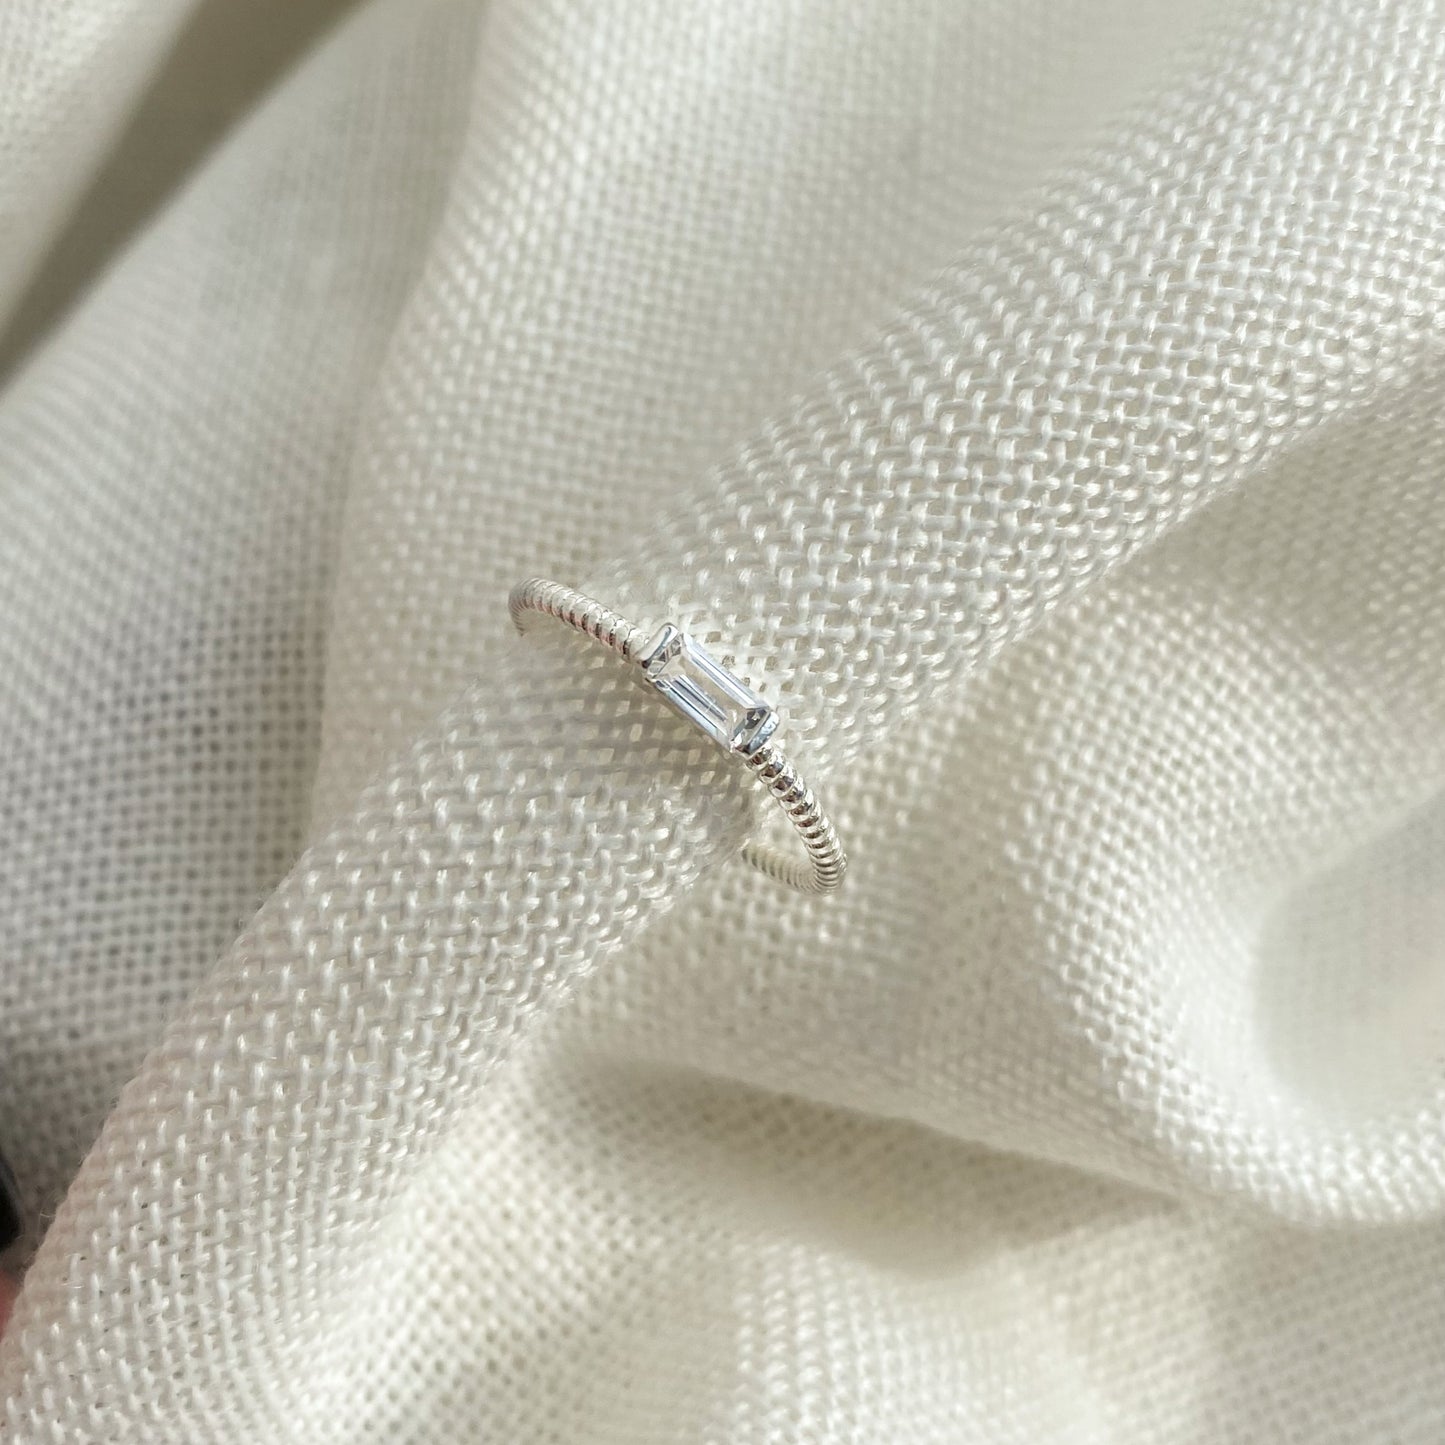 Dainty Baguette Ring in 925 Sterling Silver gold plated ∙ Fine Stackable rings ∙ 100% silver ∙ Sparkling Ring ∙ Thin Twisted Band Ring